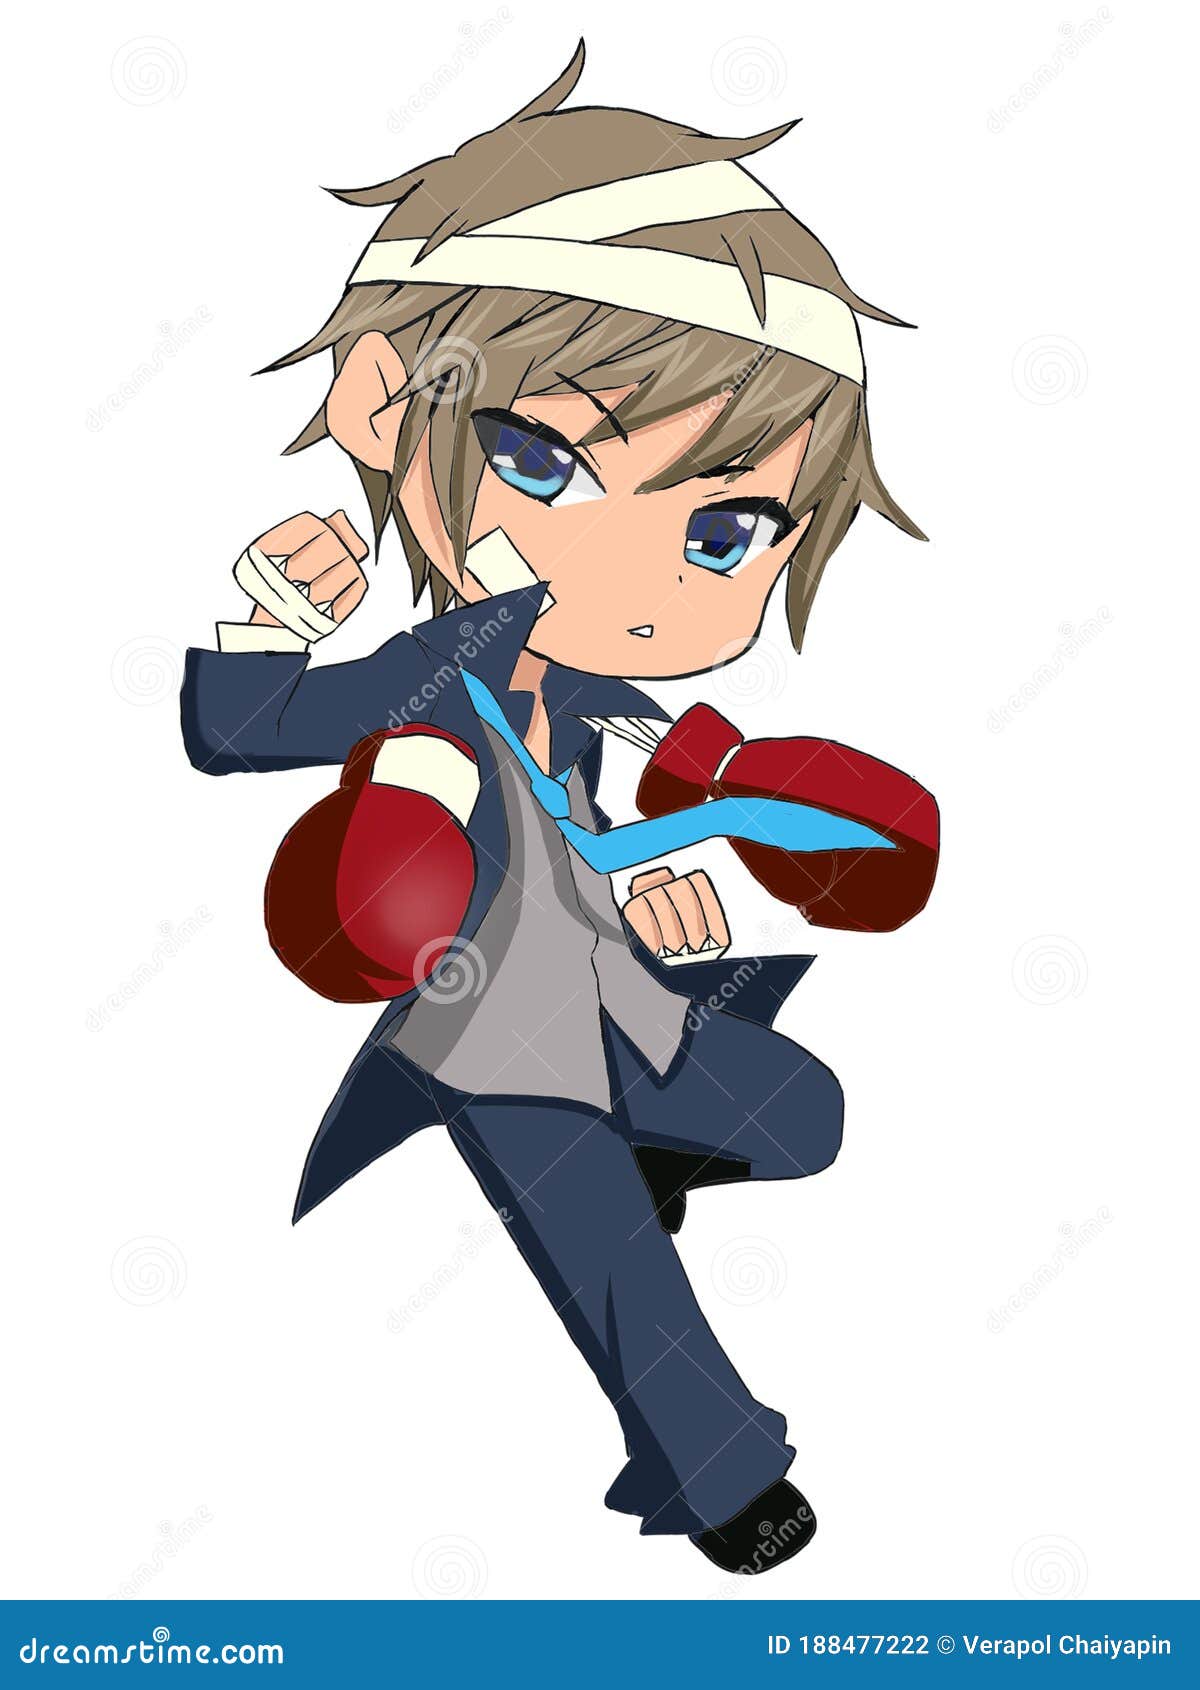 Chibi Anime Boy Vector Images (over 380)